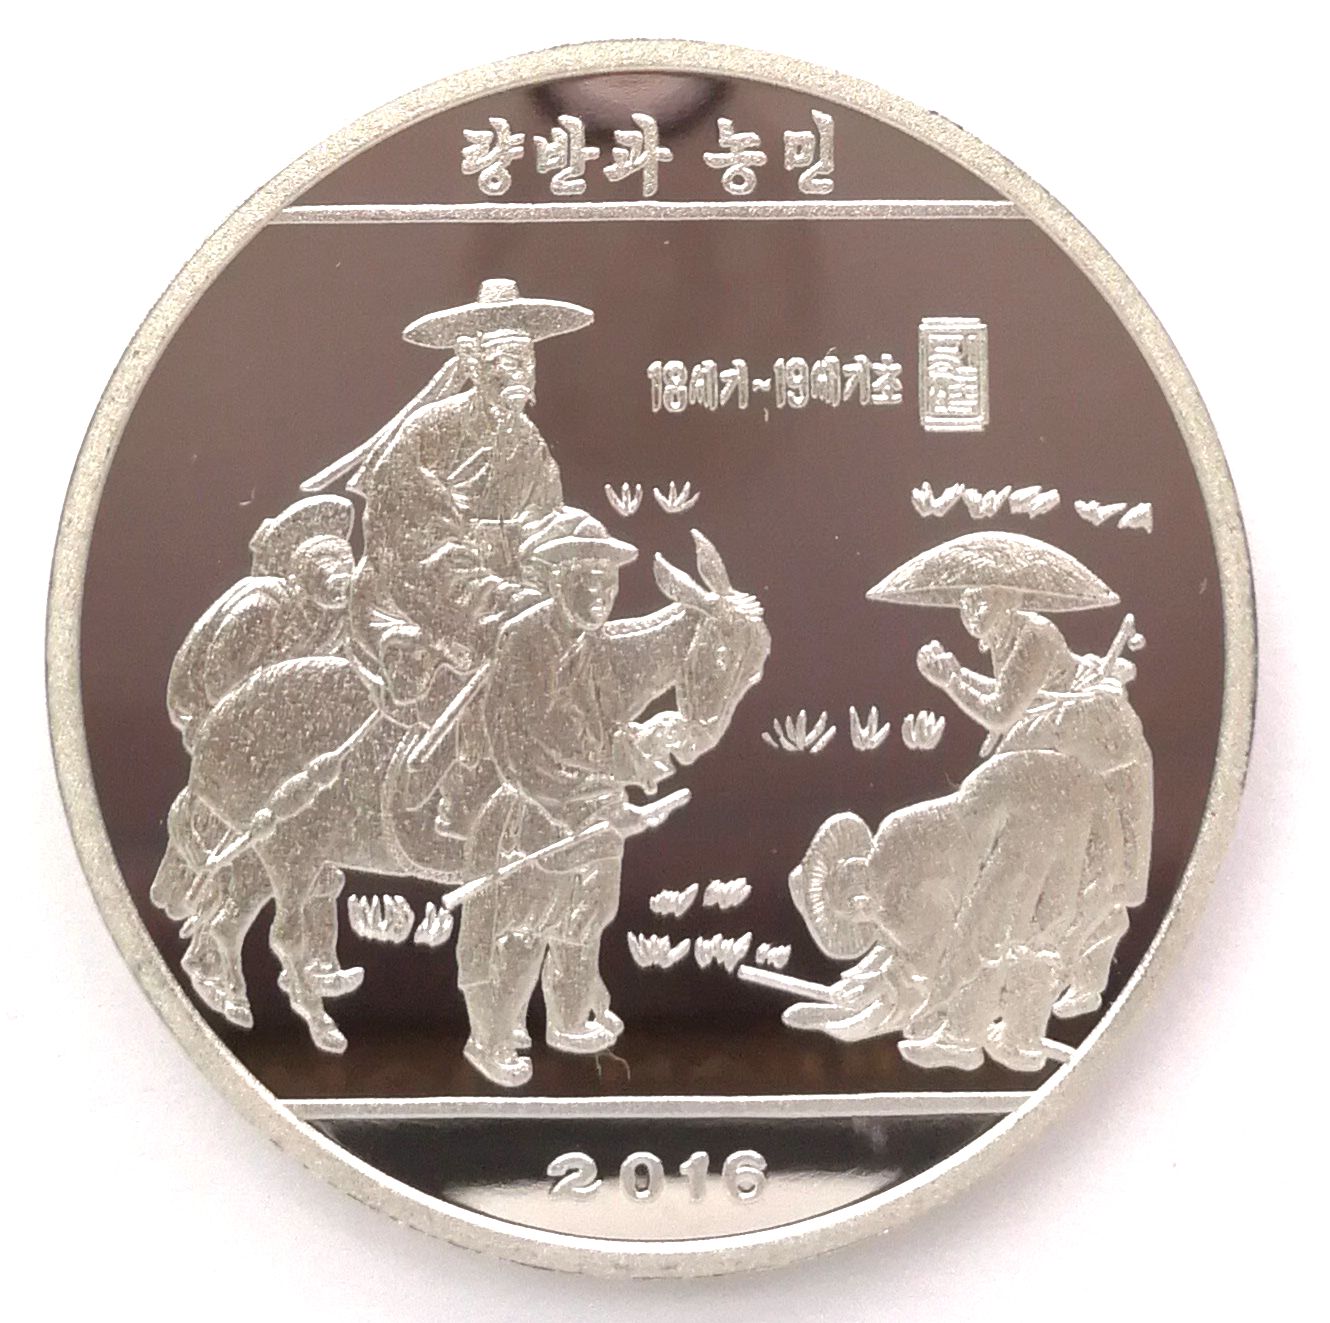 L3208, Korea Painting Commemorative Coin "Meeting on the Road", Alu 2016